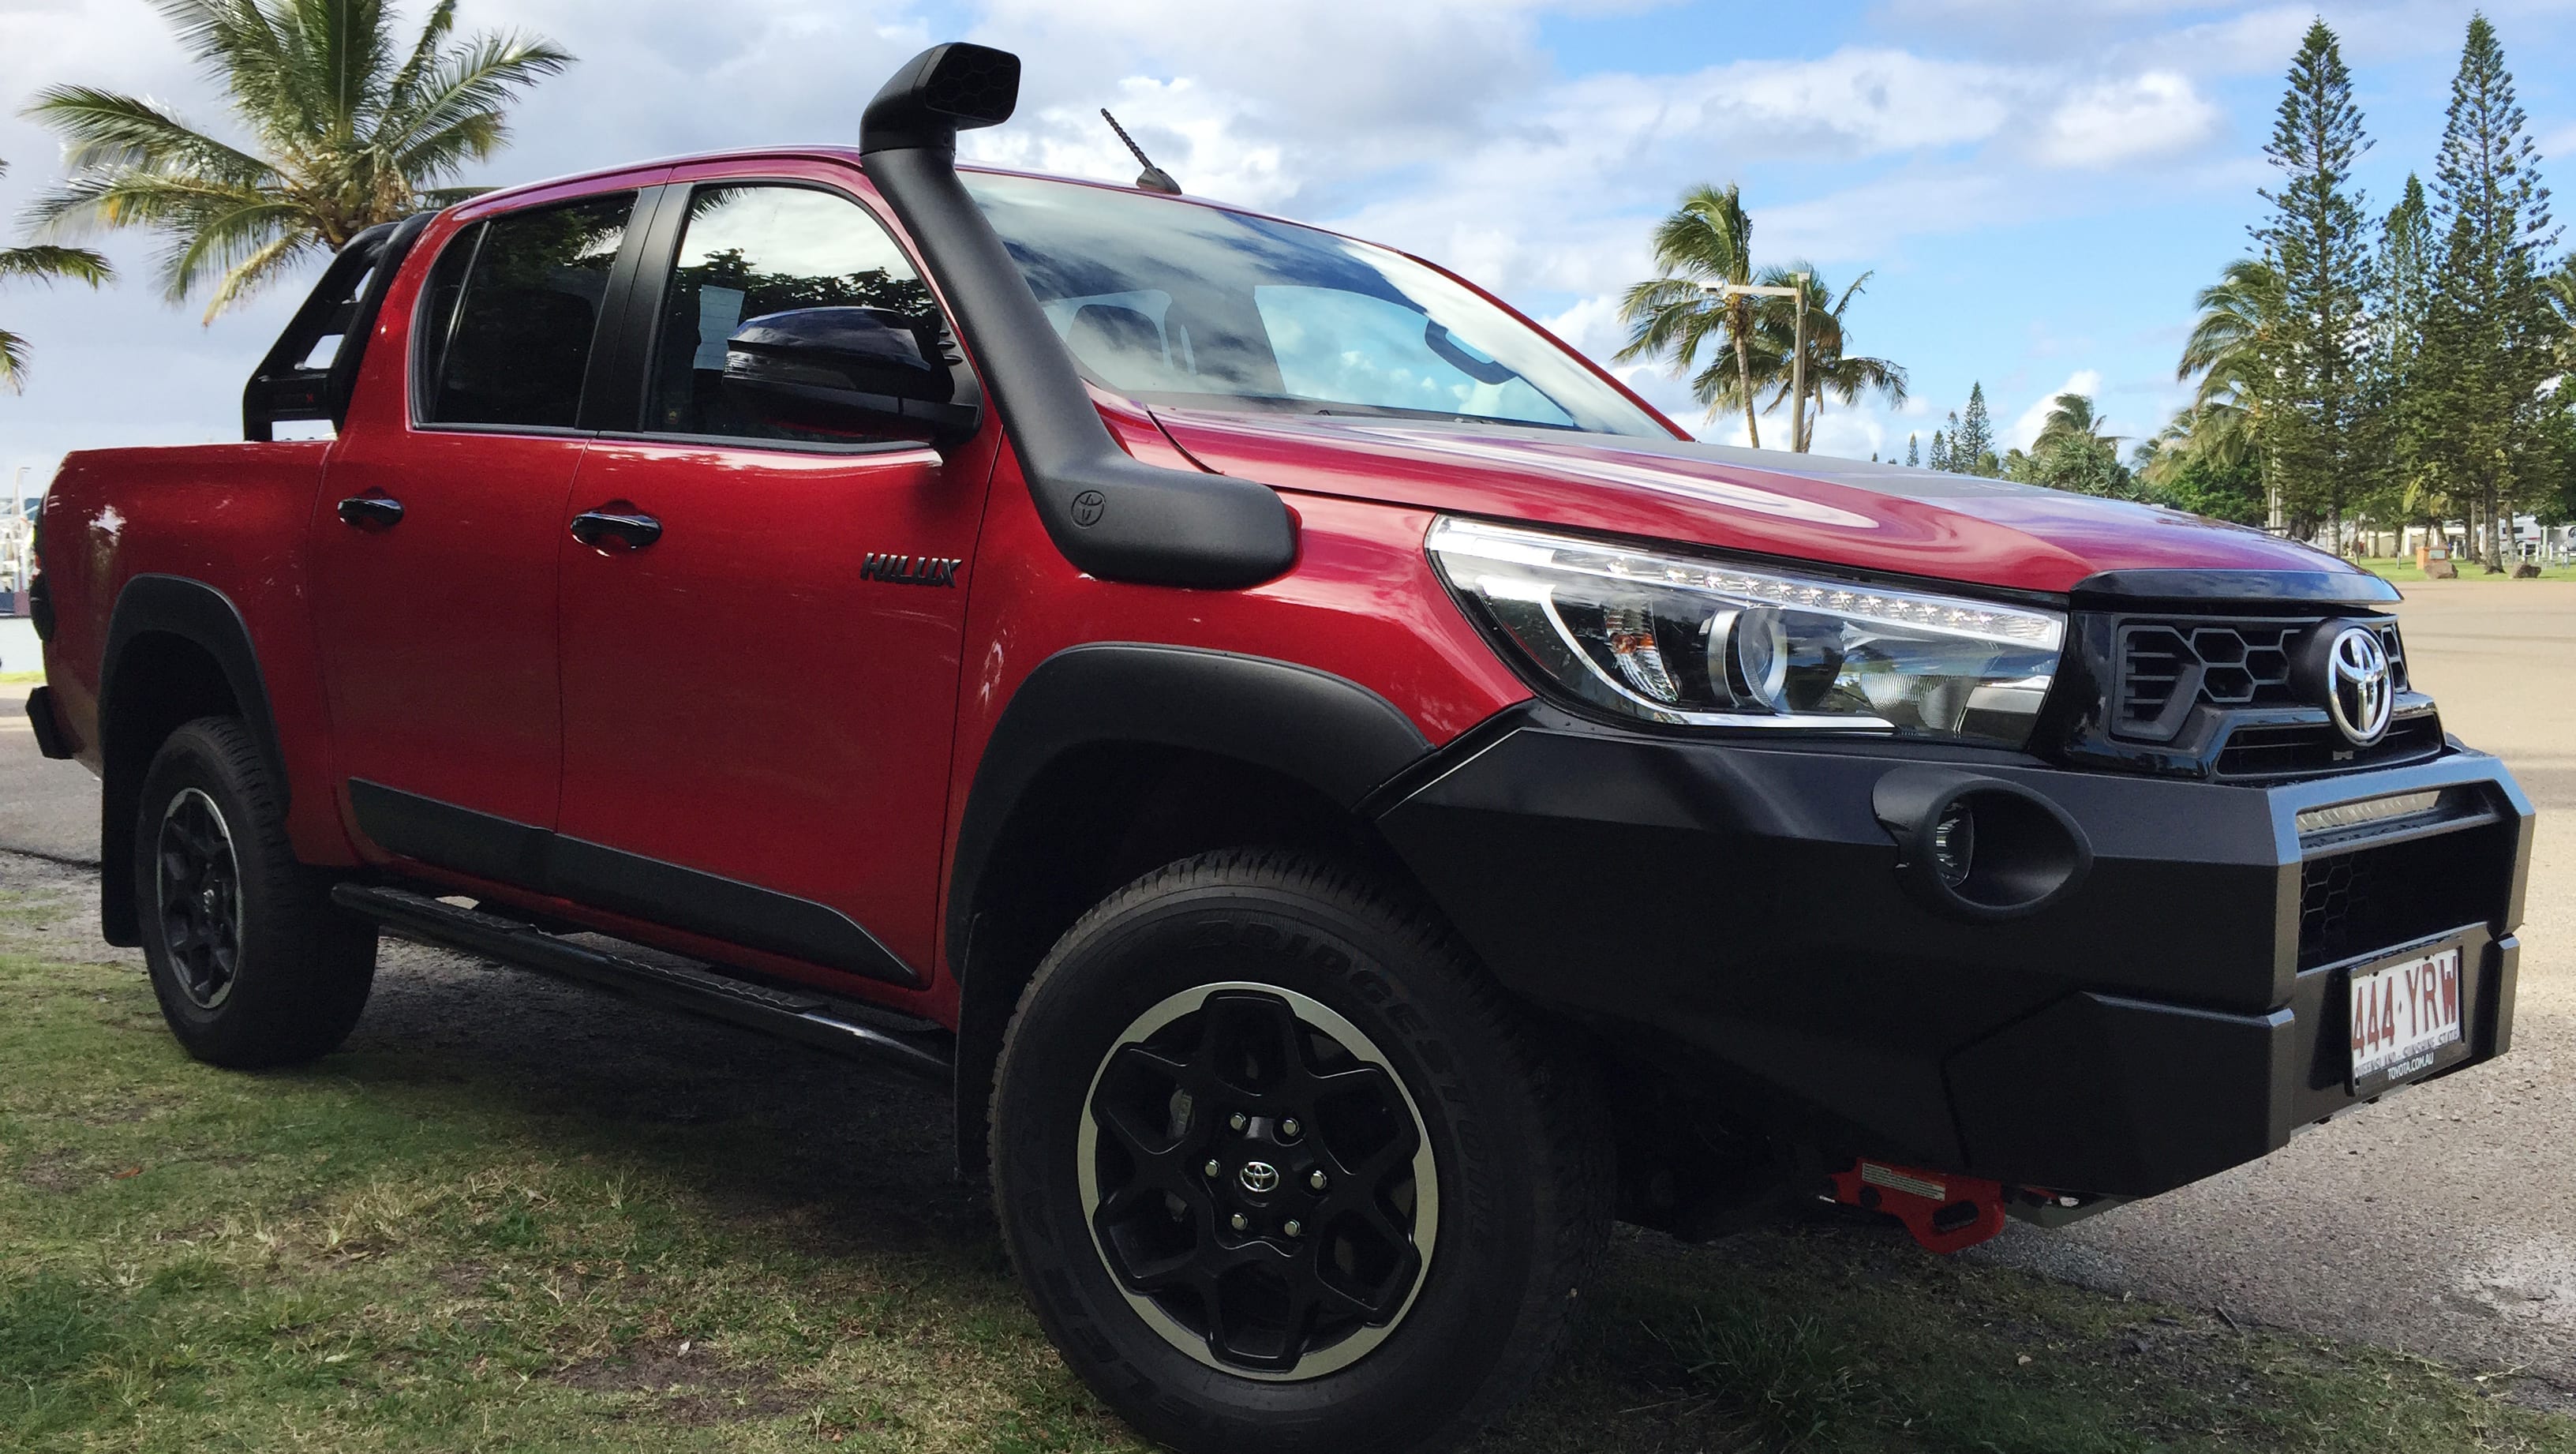 Toyota HiLux 2019 review: Rugged X | CarsGuide